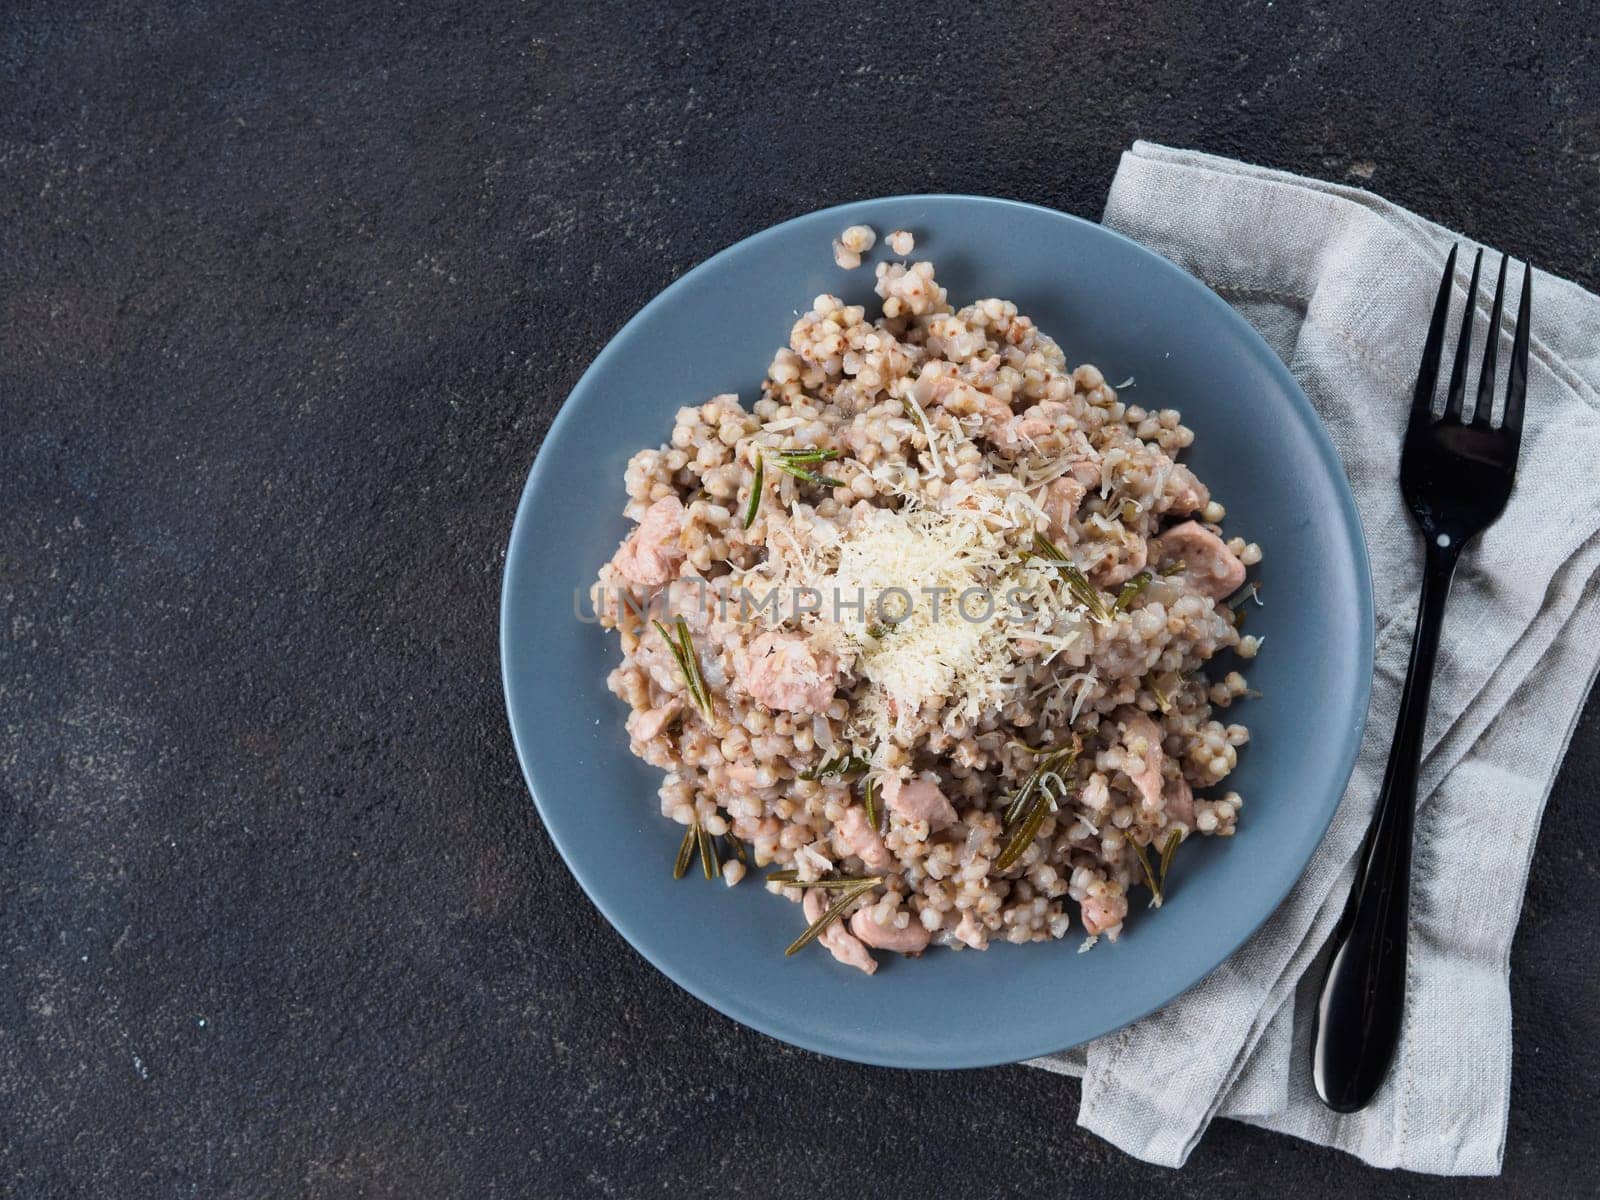 Raw buckwheat risotto with chicken meat and rosemary served parmesan cheese in gray plate on black cement background. Gluten-free and buckwheat recipe ideas. Copy space